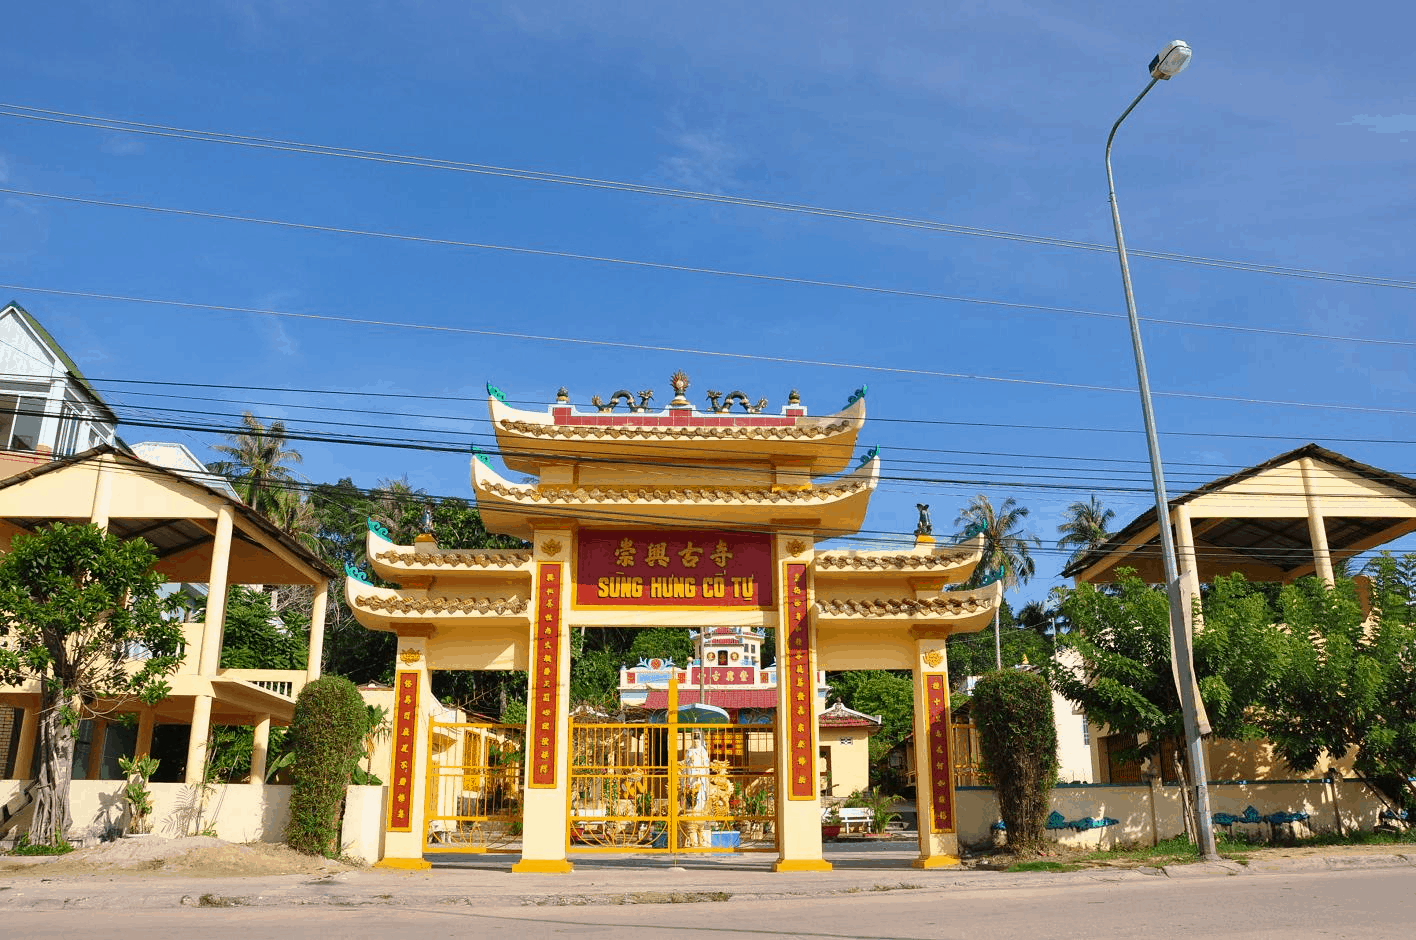 Sung Hung Ancient Pagoda - the old pagoda in Phu Quoc (collectibles)